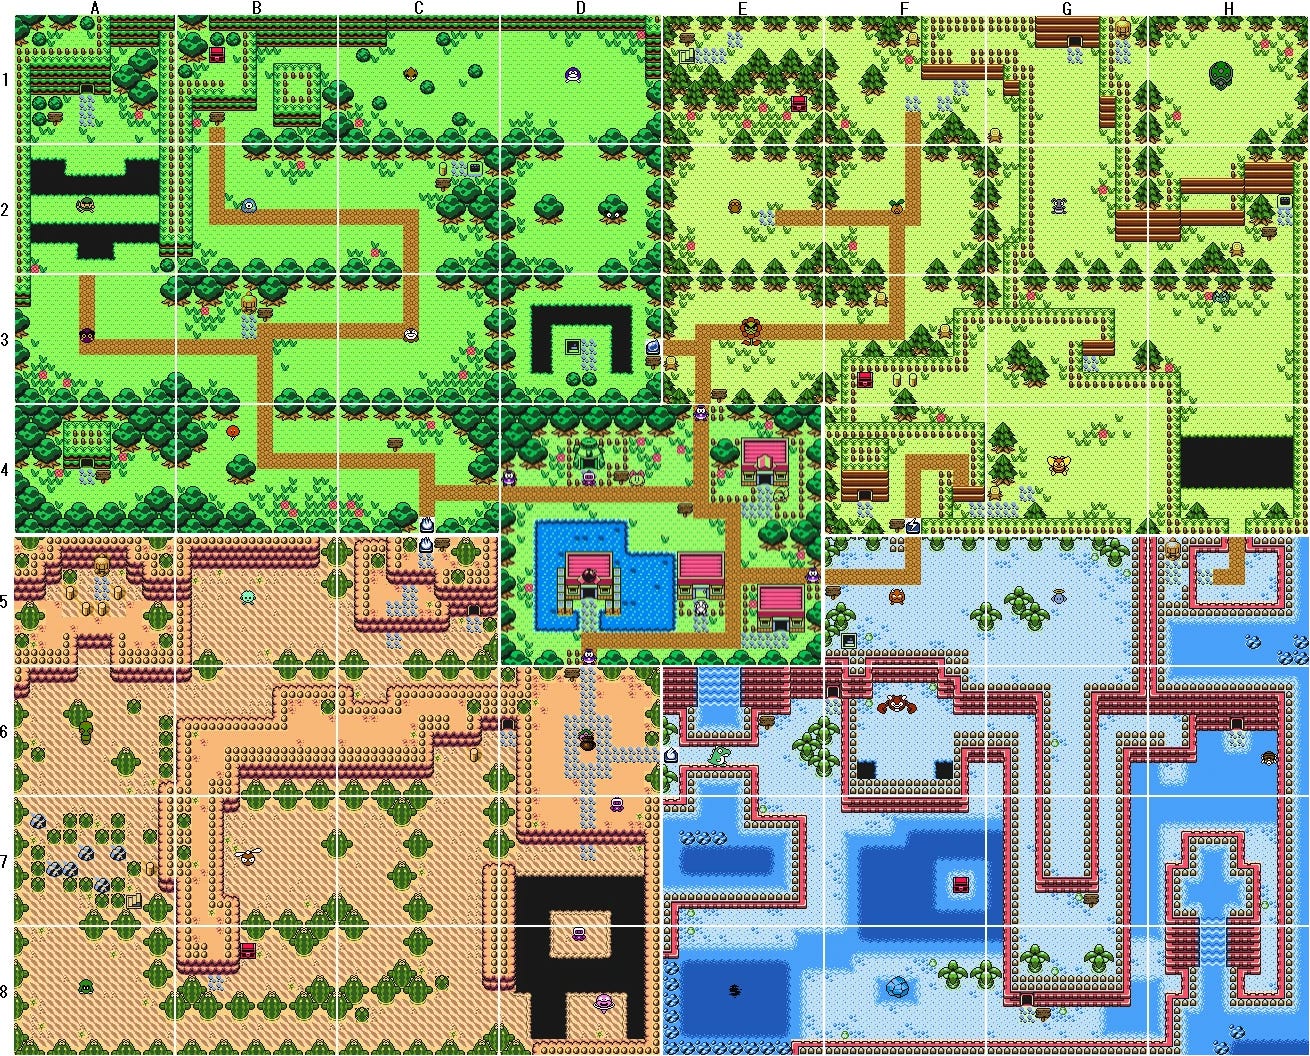 A screenshot of Bomberman Quest's overworld map, which at first glance could very easily be mistaken for a Zelda map